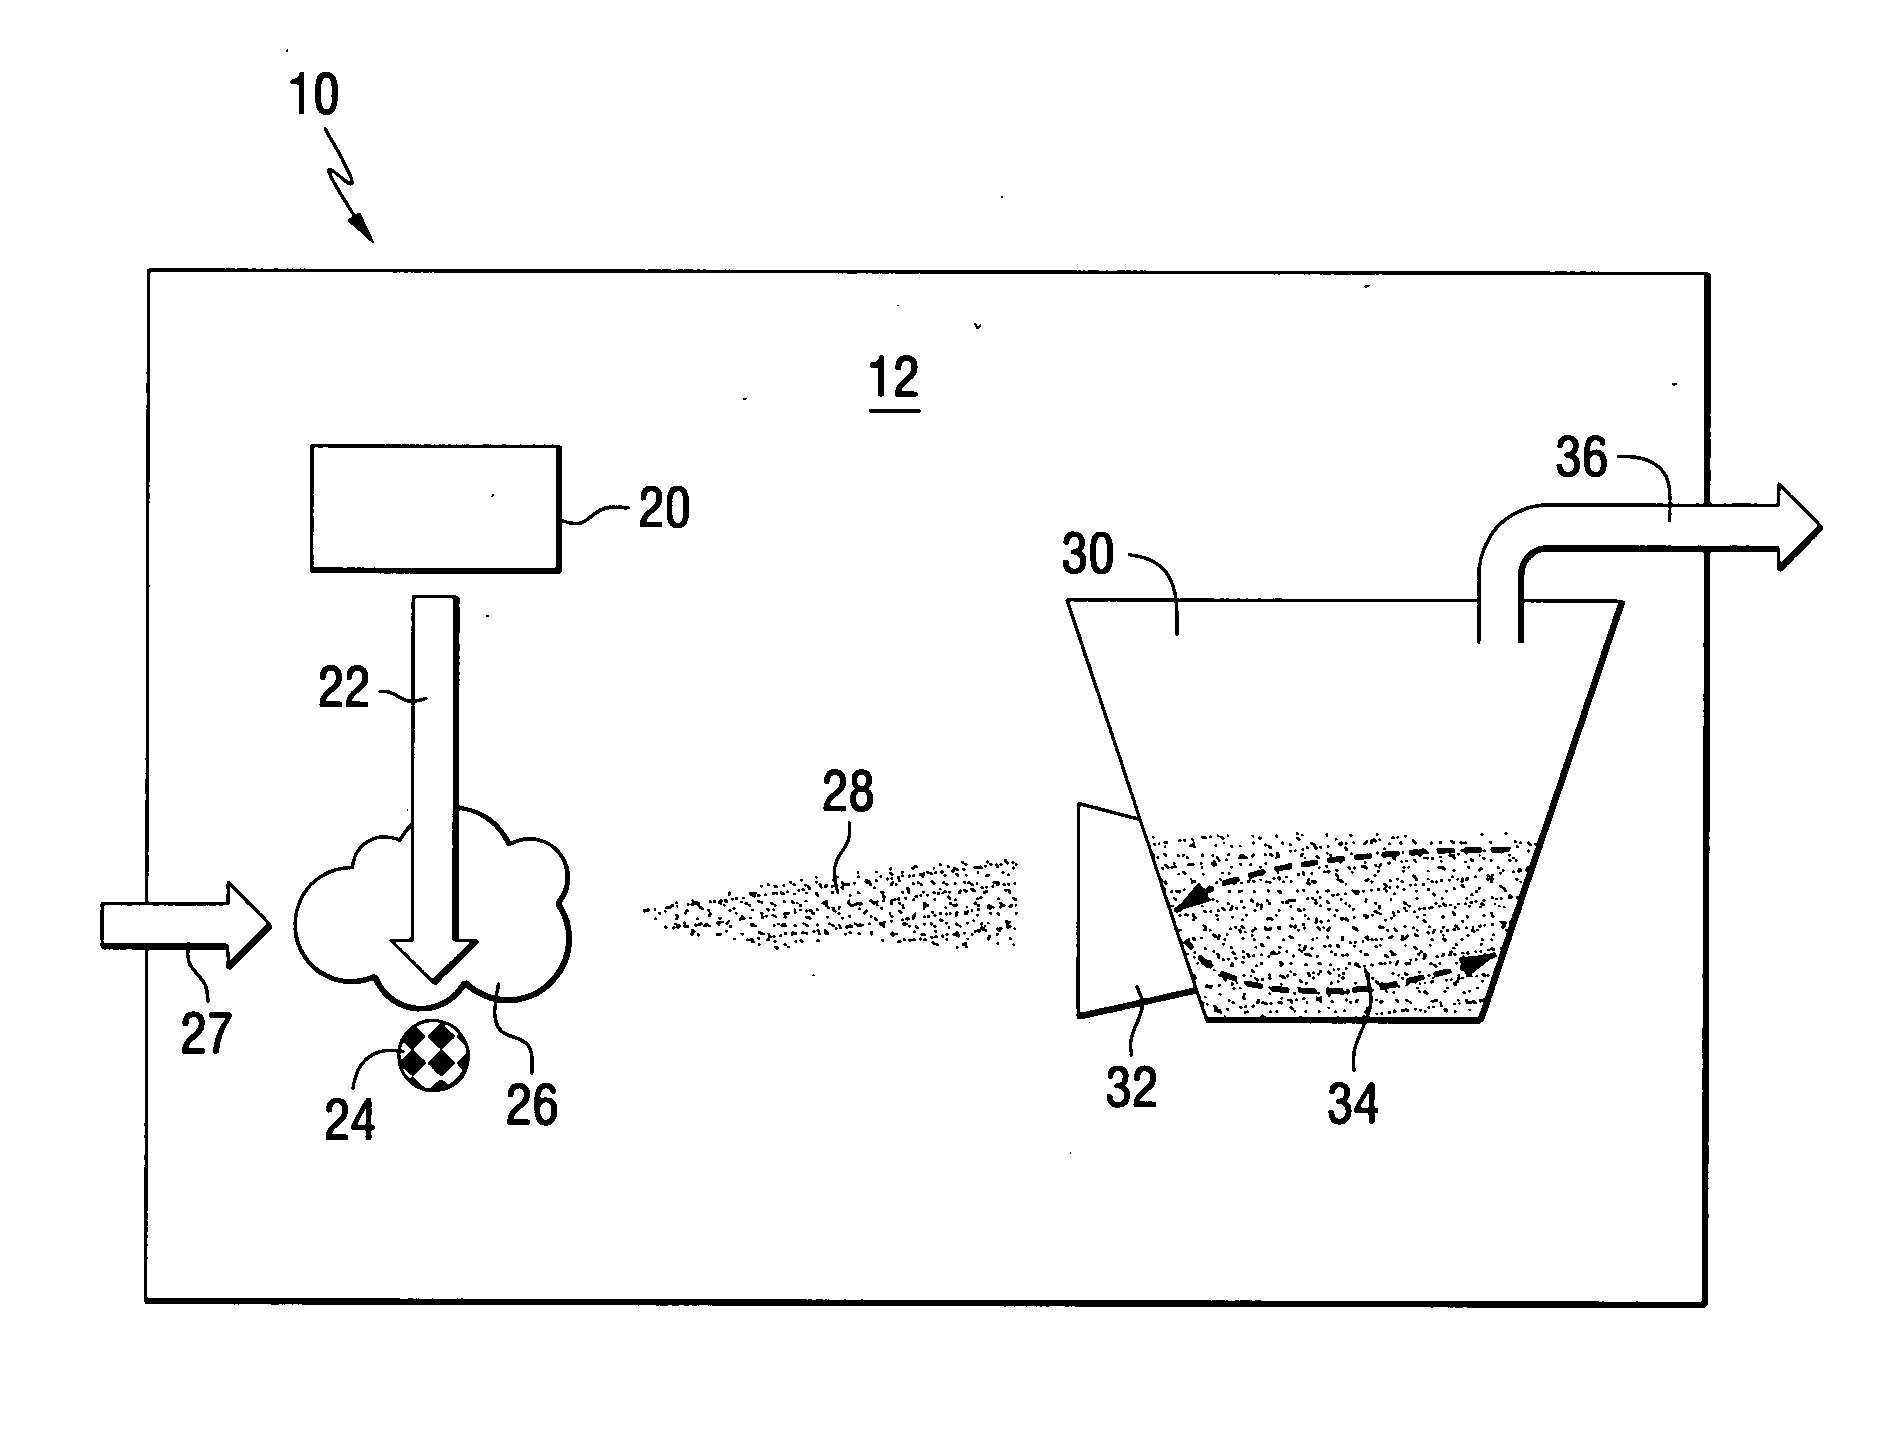 Method and apparatus for coating particulates utilizing physical vapor deposition